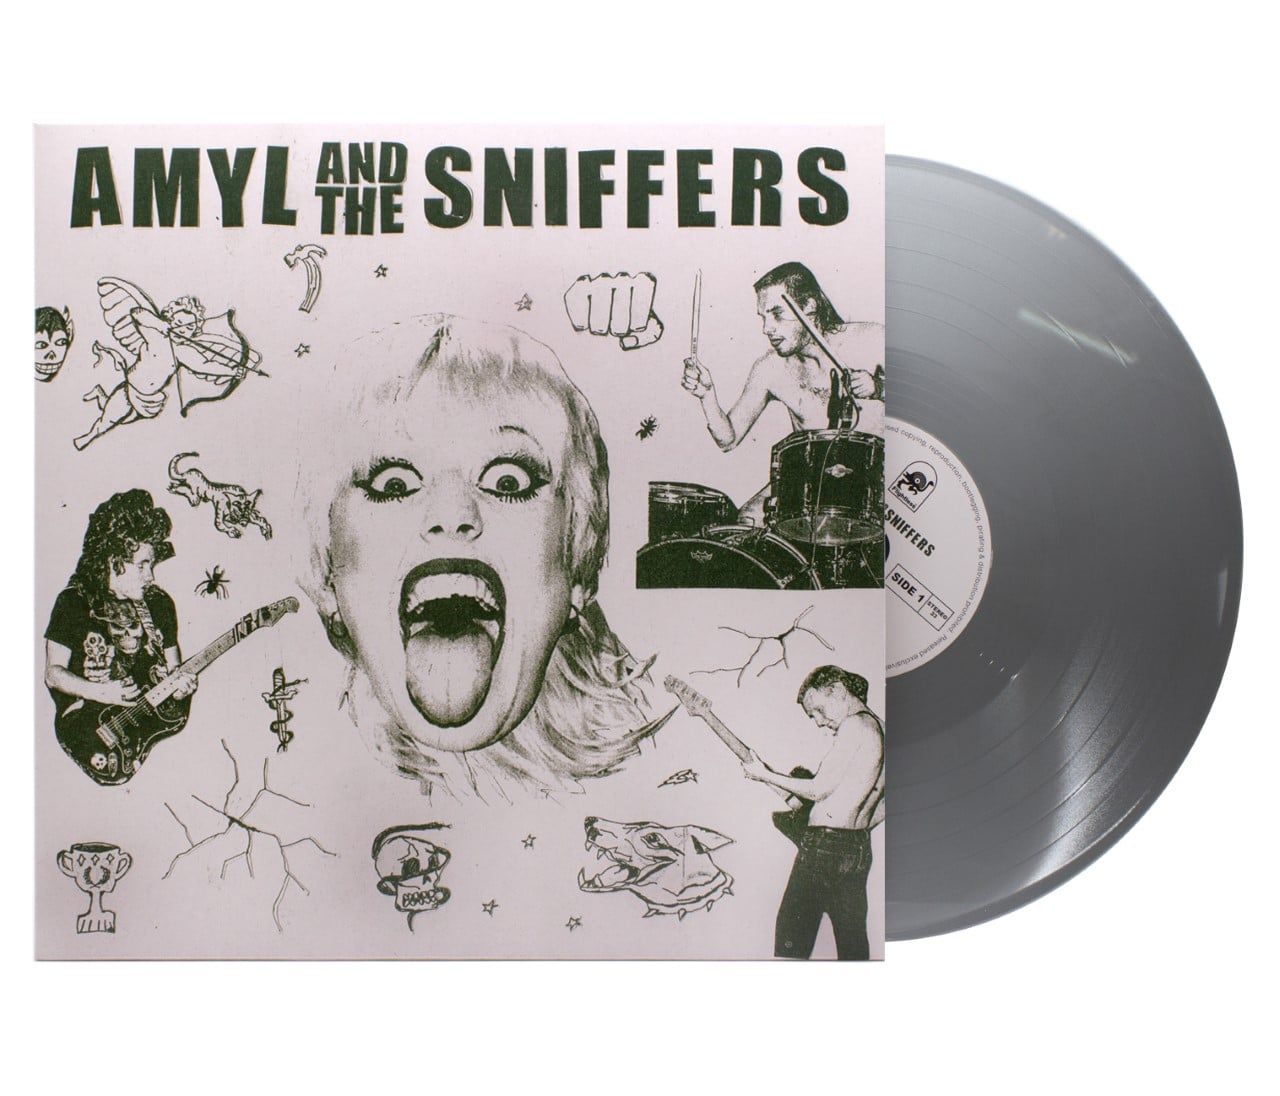 Amyl & The Sniffers – Amyl & The Sniffers (silver RSD version)